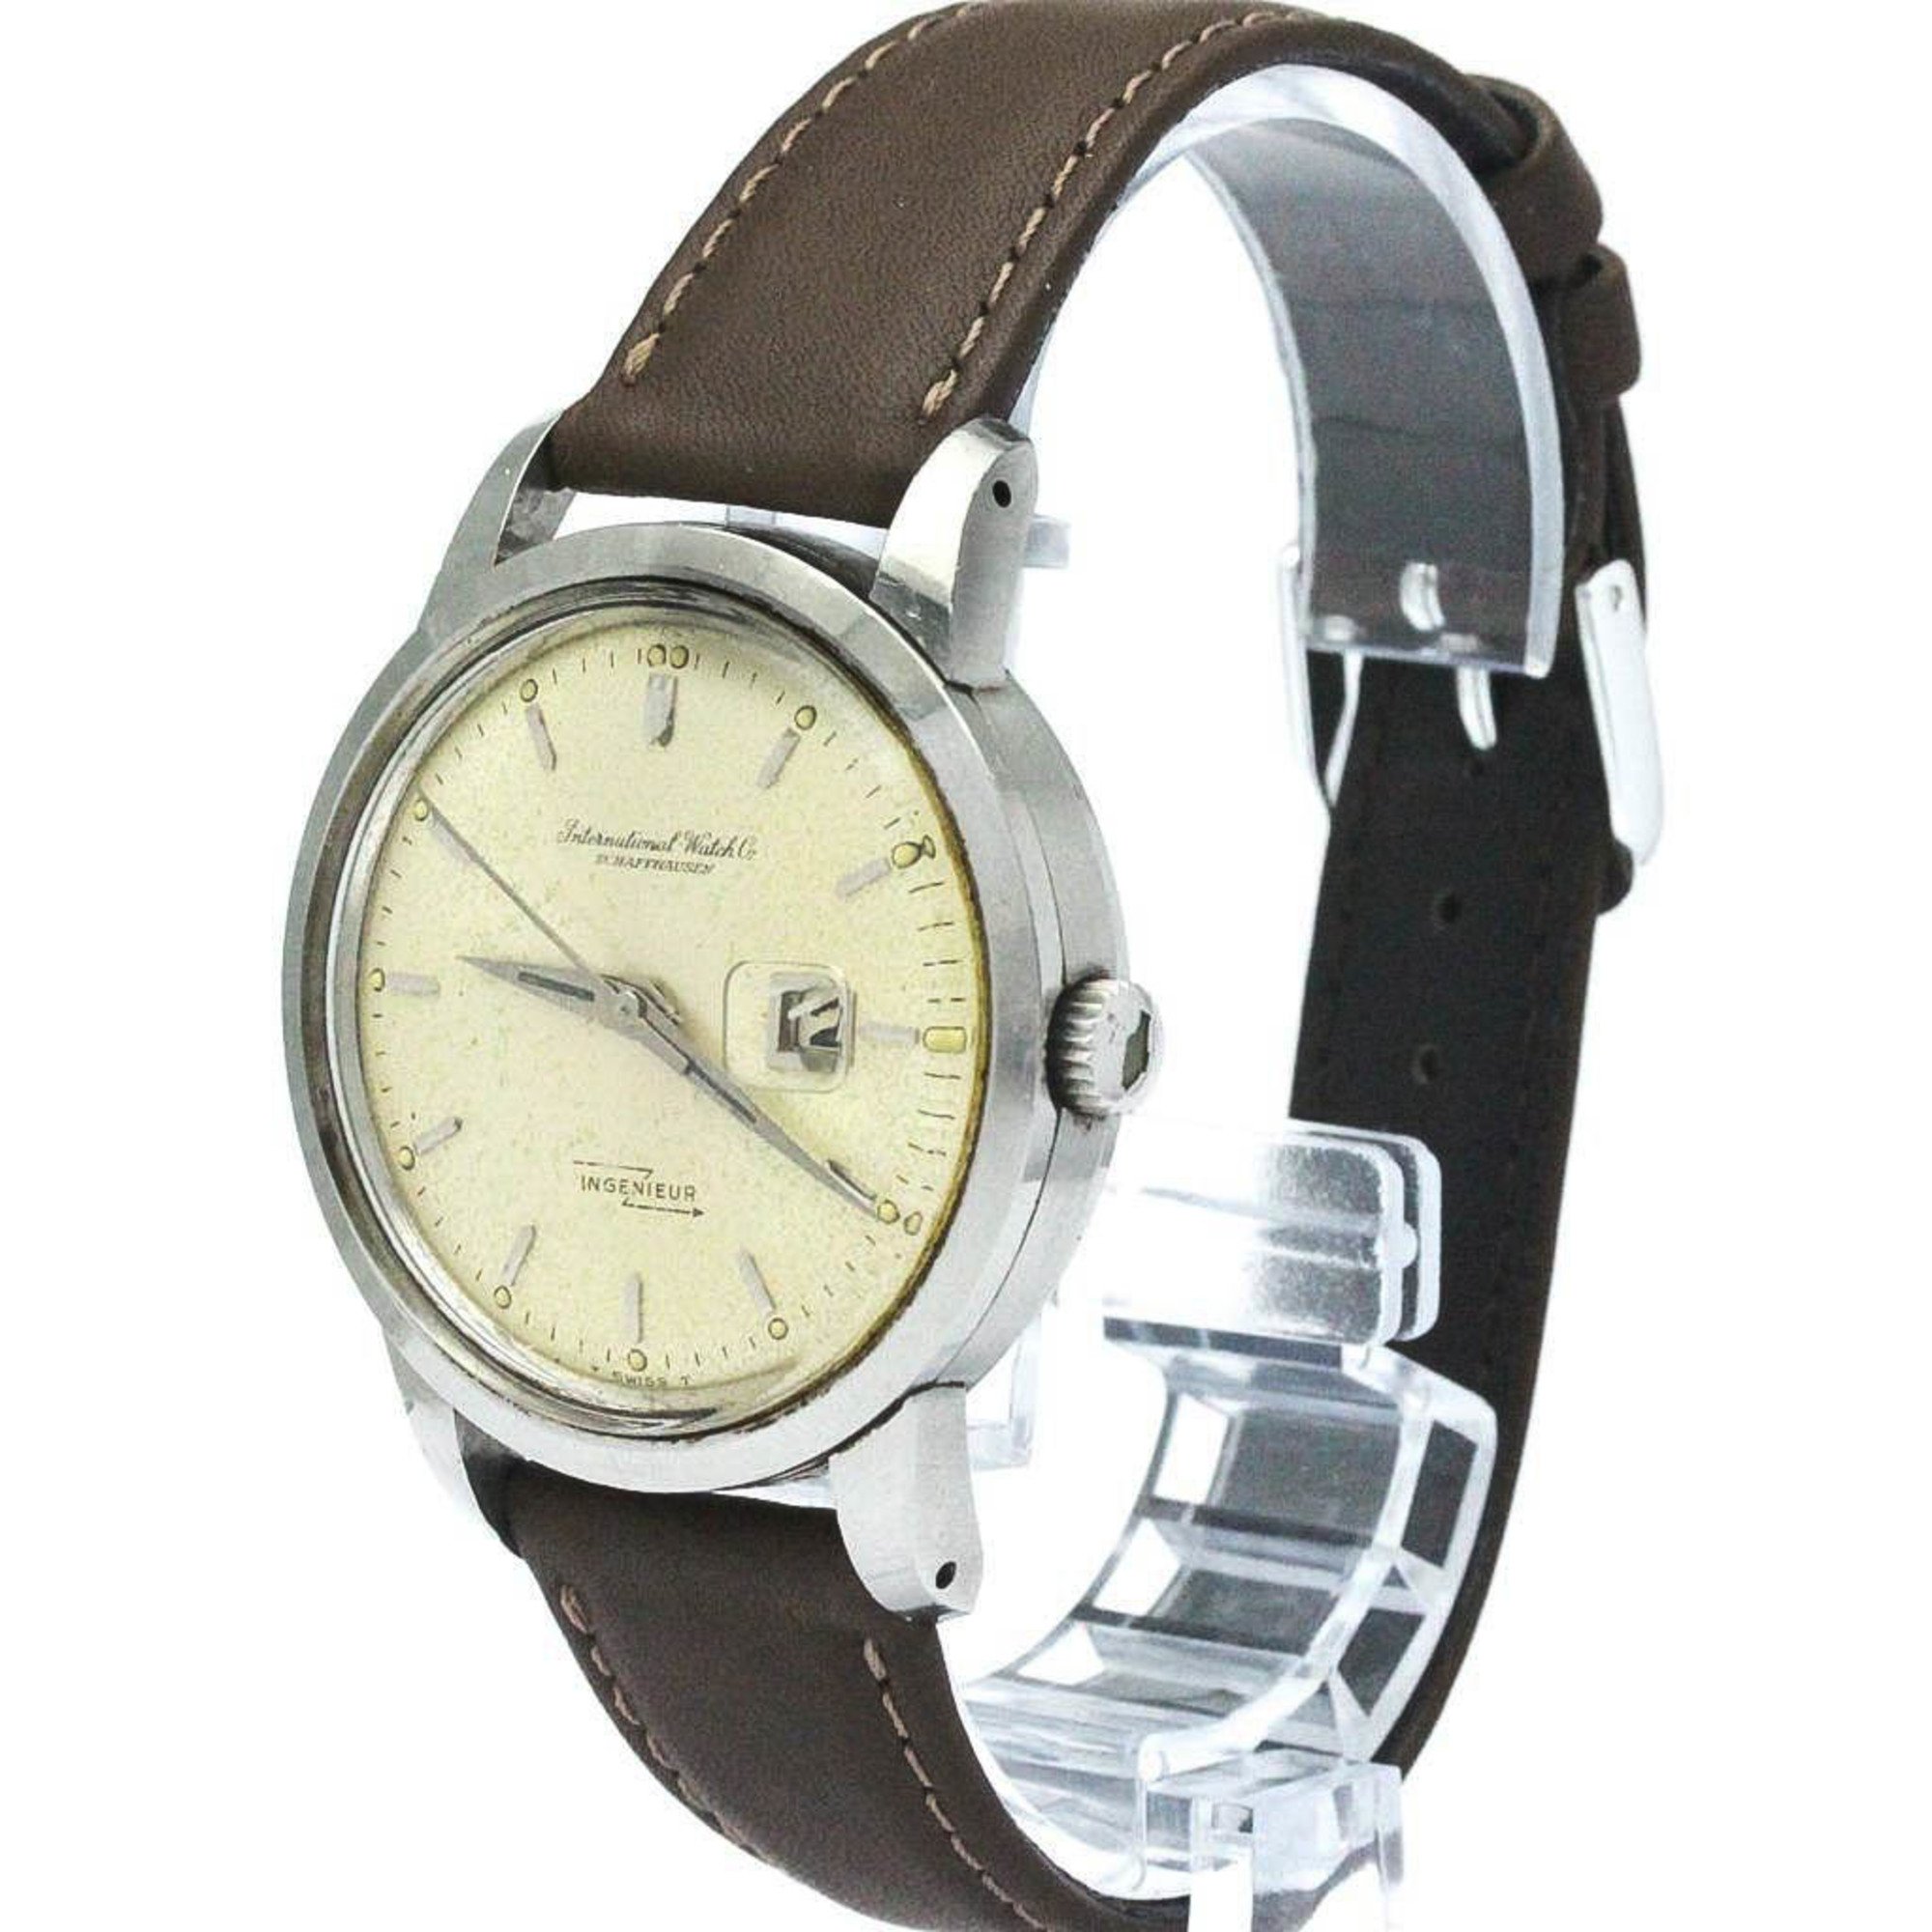 Vintage IWC Ingenieur Cal C.8531 Steel Leather Automatic Mens Watch BF570033